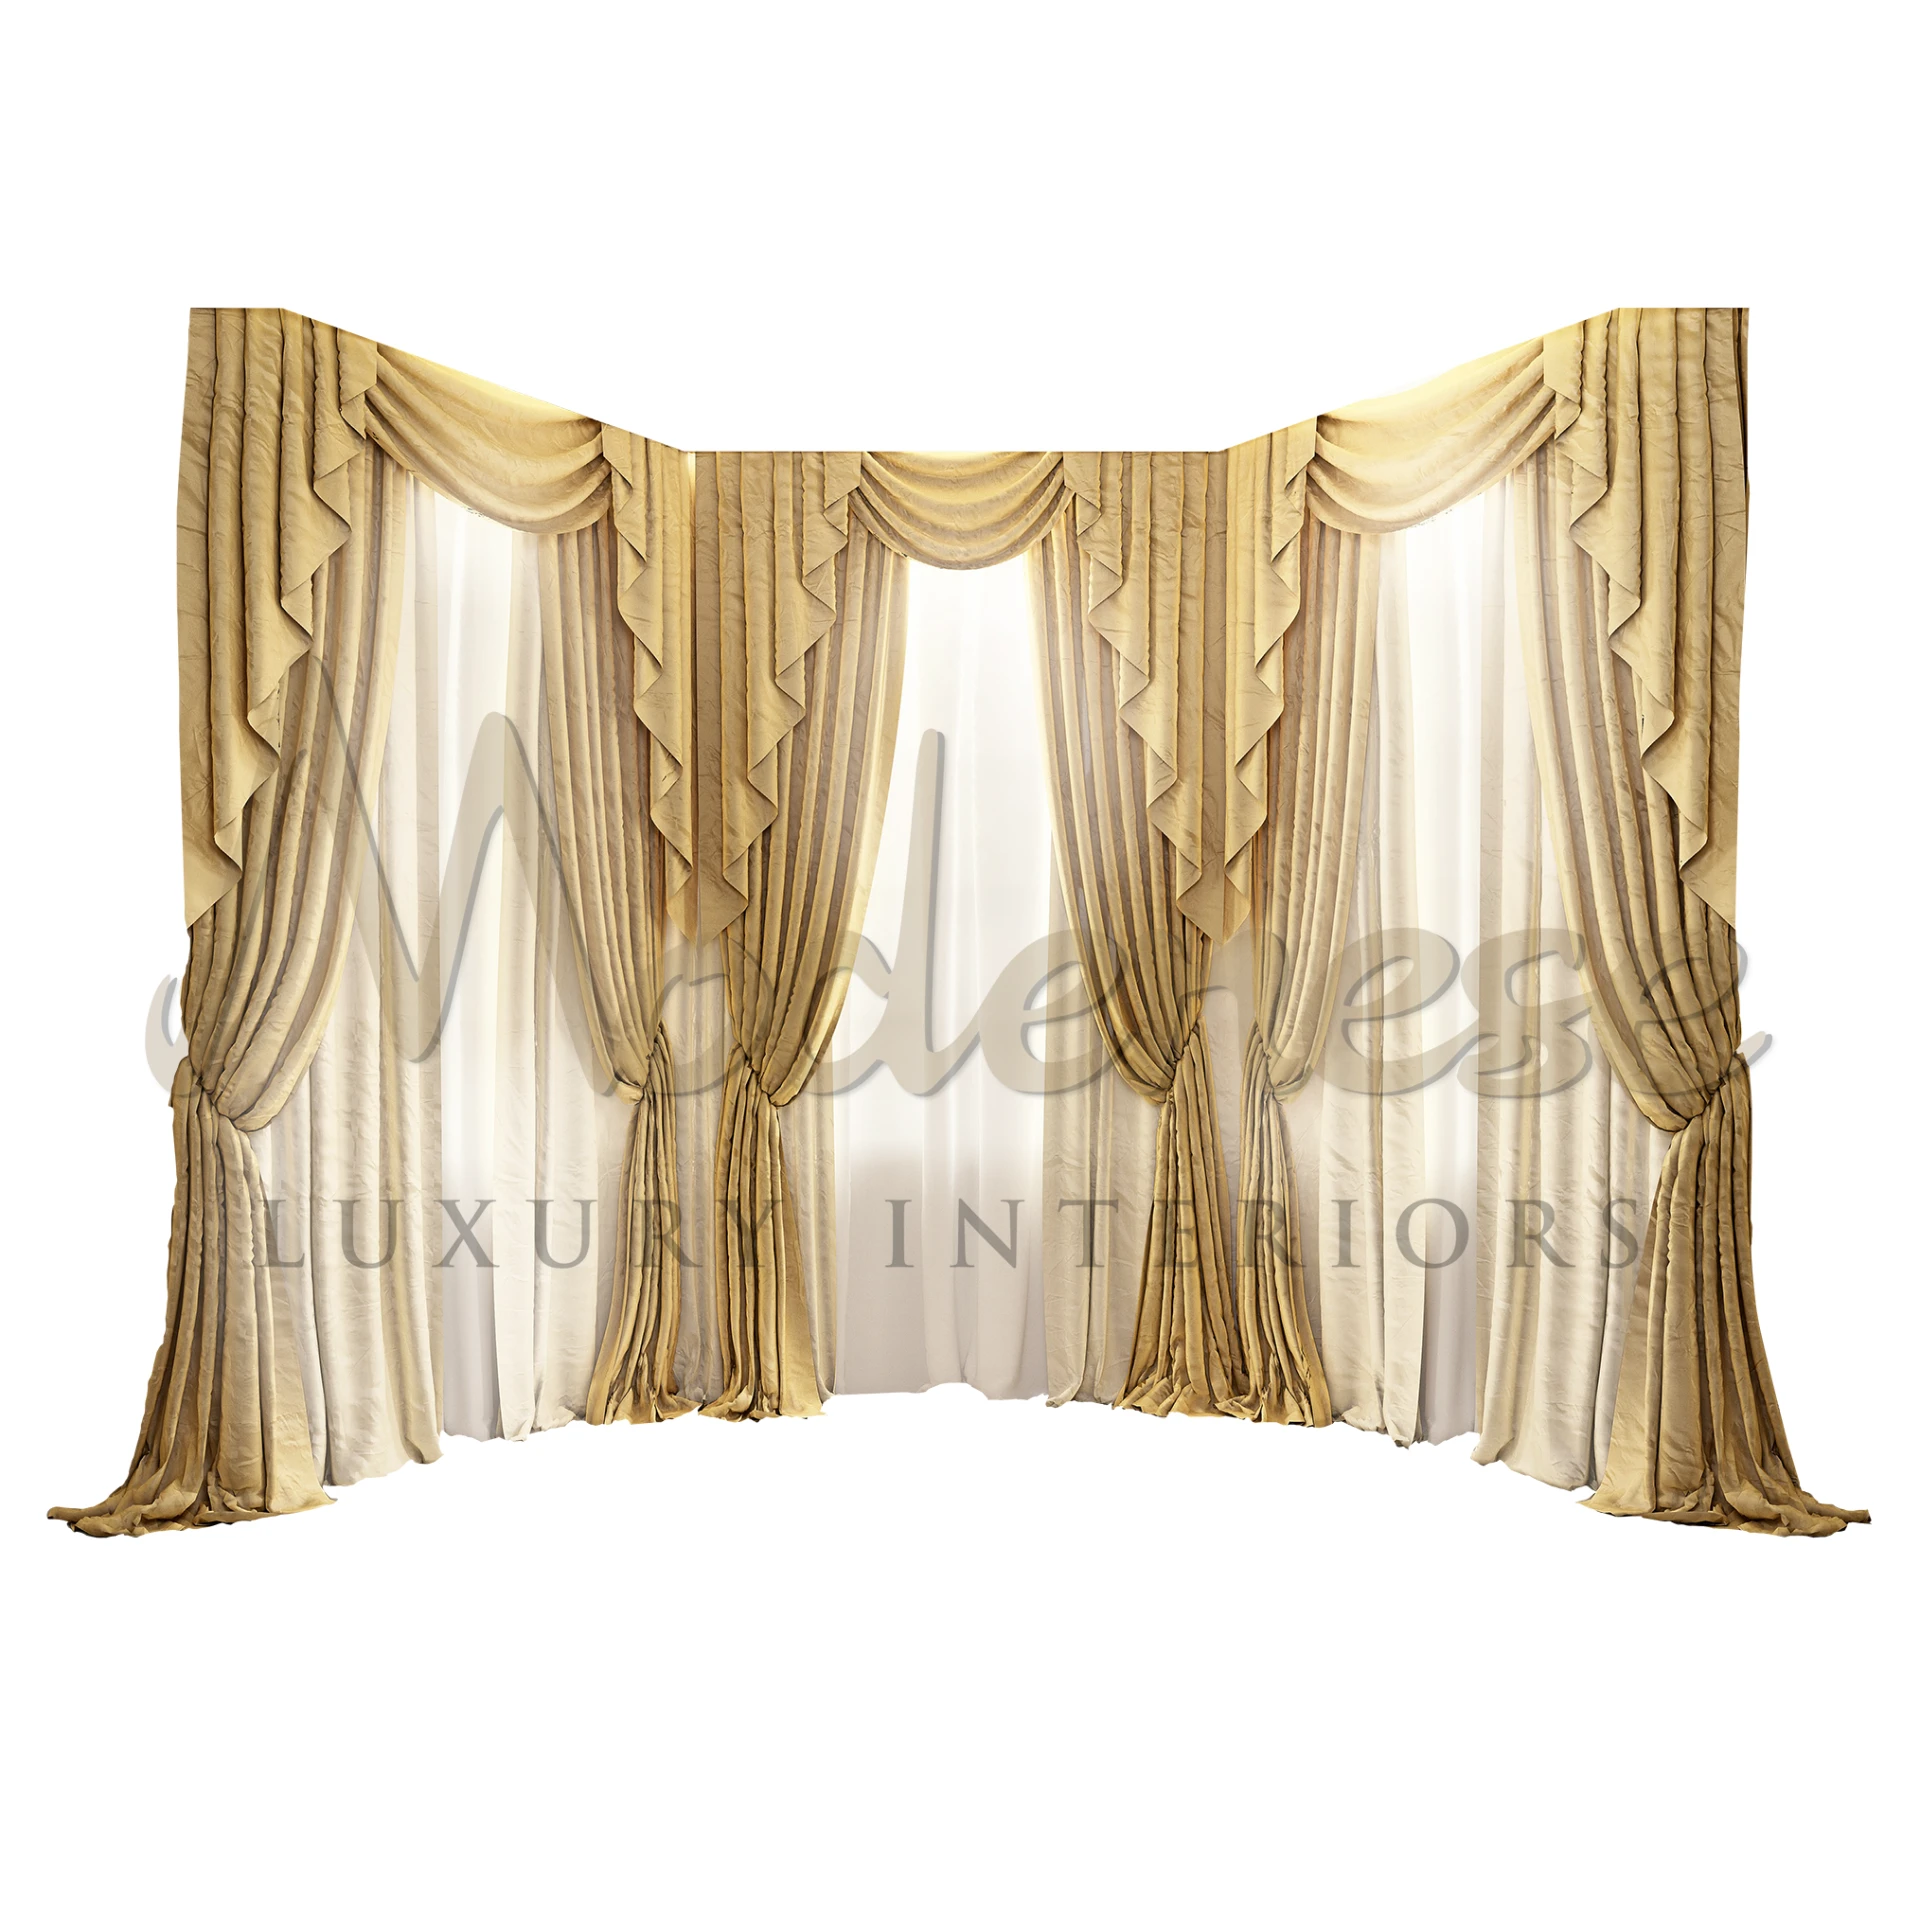 Elegant Beige Silk Curtains with a velvety-smooth texture, adding a subtle lustrous sheen and glamour to the room's ambiance.